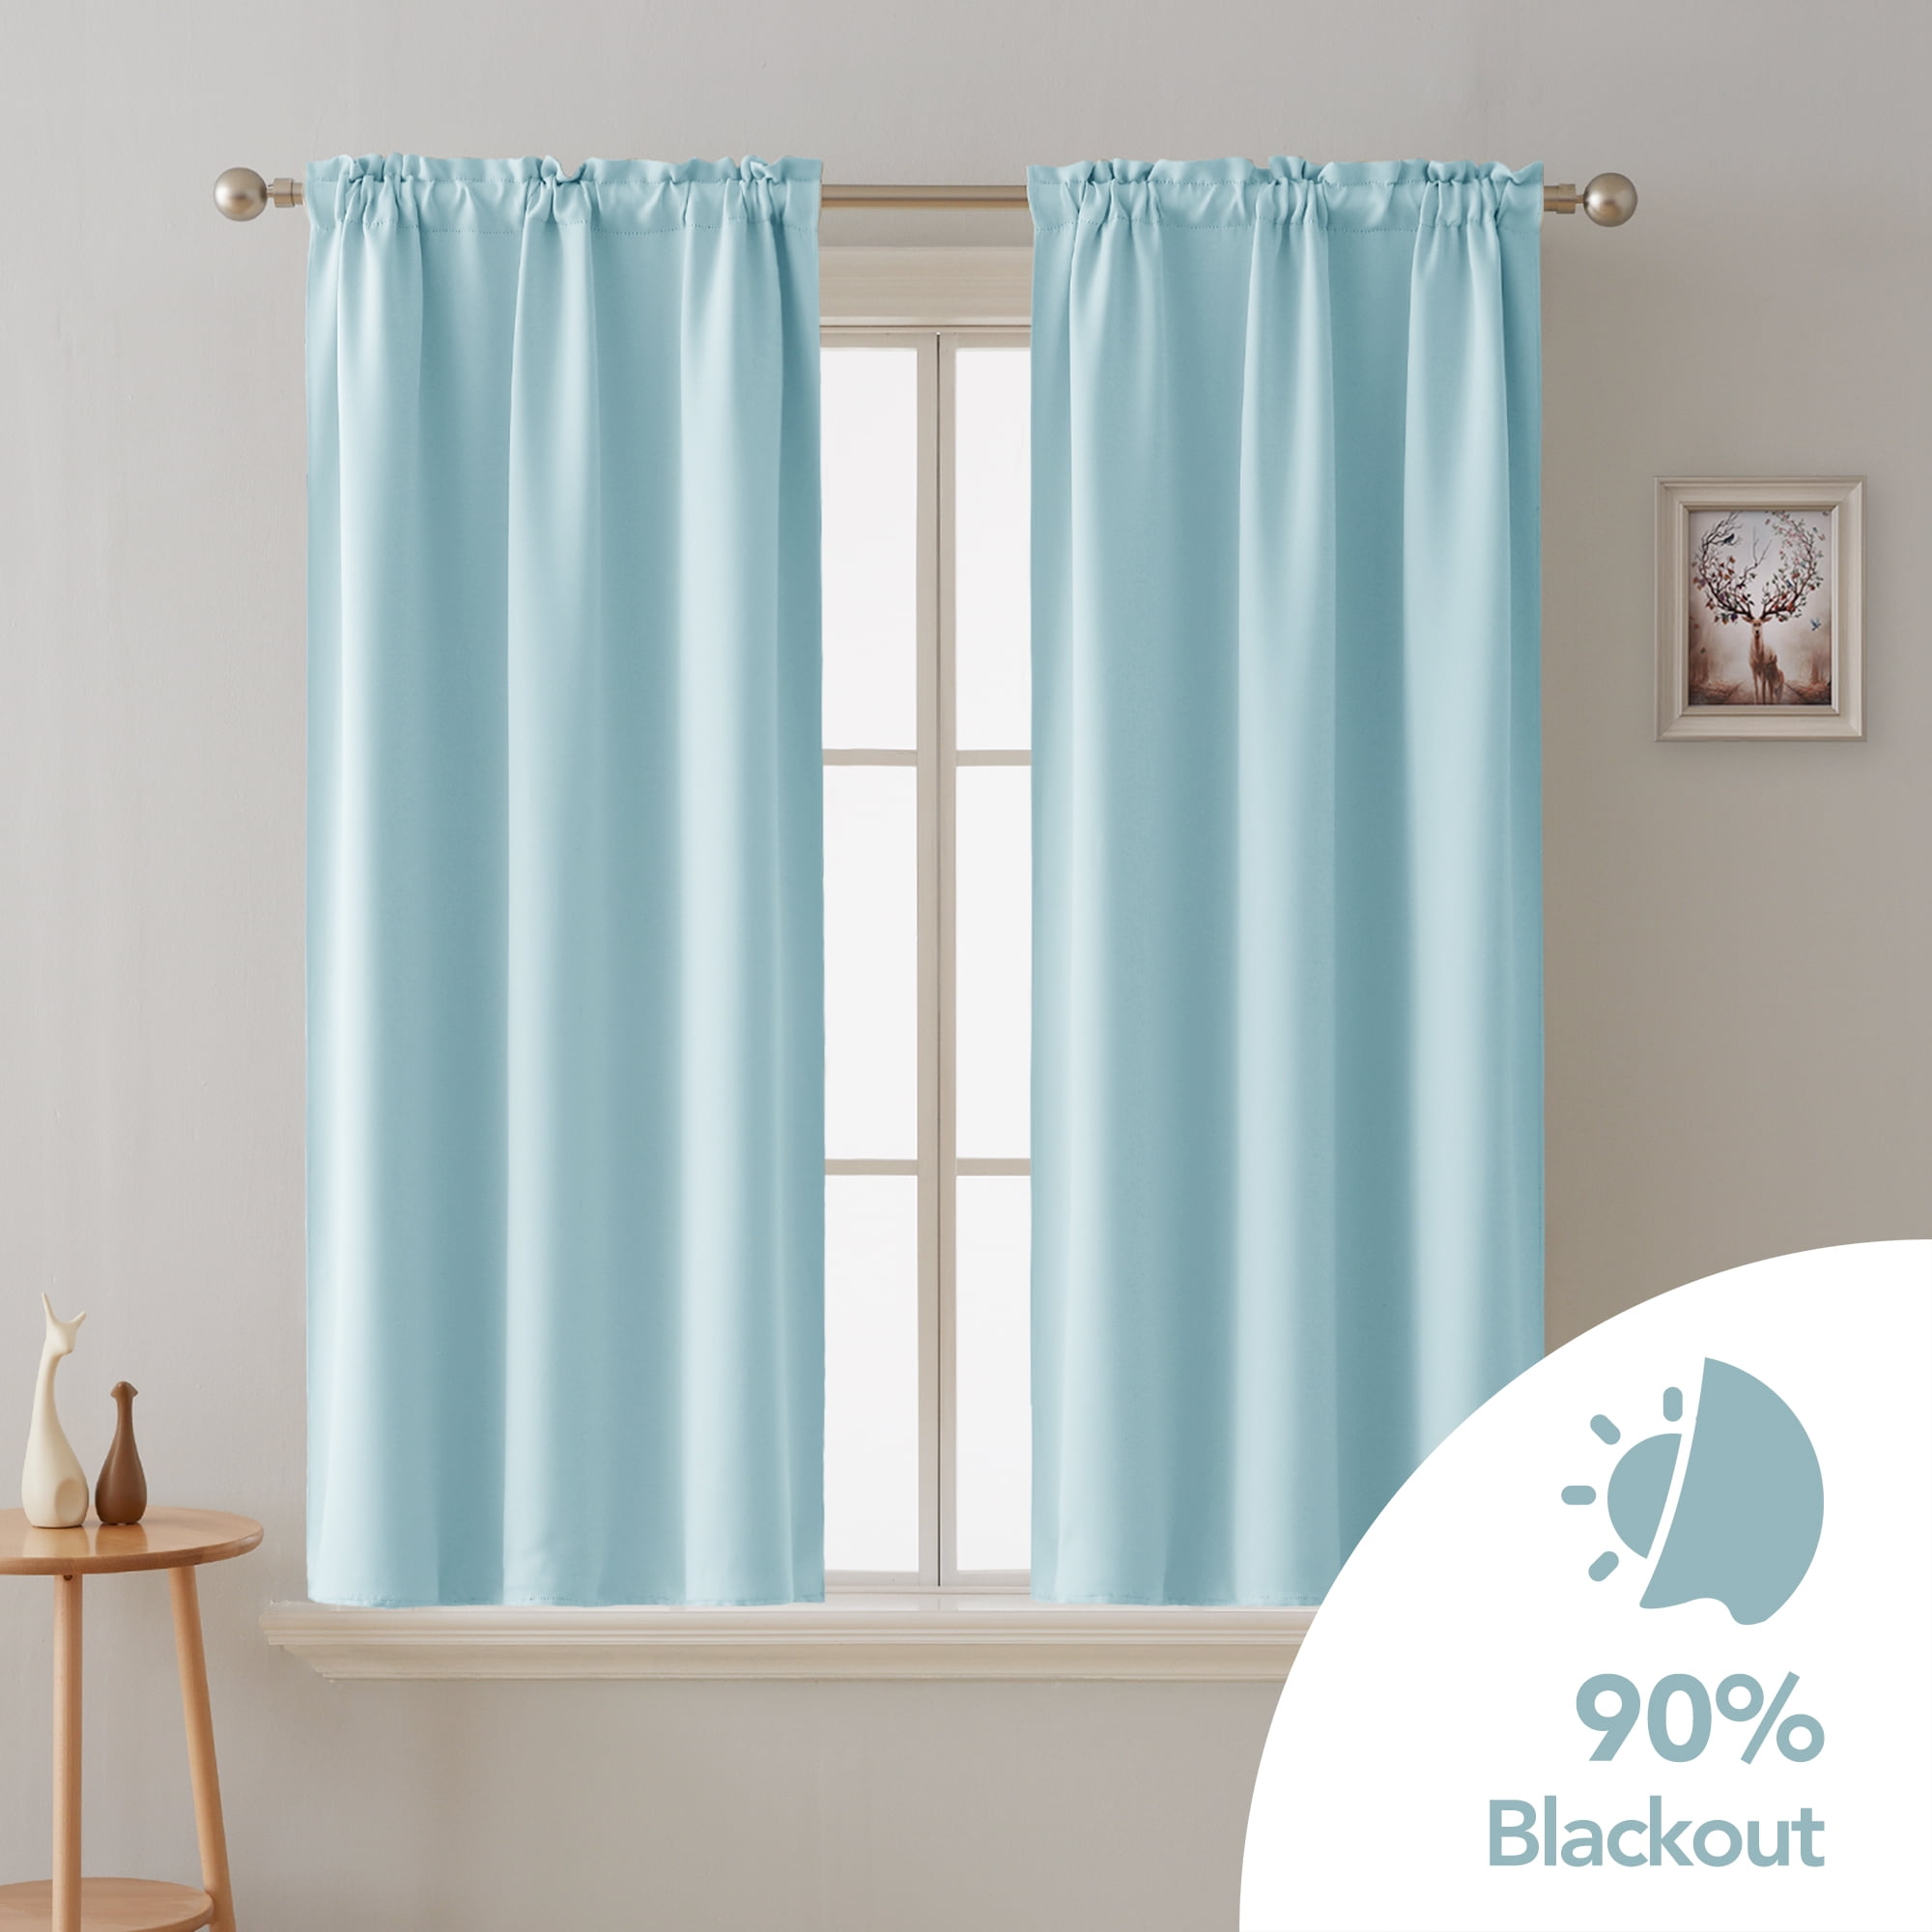 Deconovo Blackout Curtains Room Darkening Thermal Insulated Curtain Panels Rod Pocket for Living Room Baby Blue 38 x 45 Inch 2 Panels